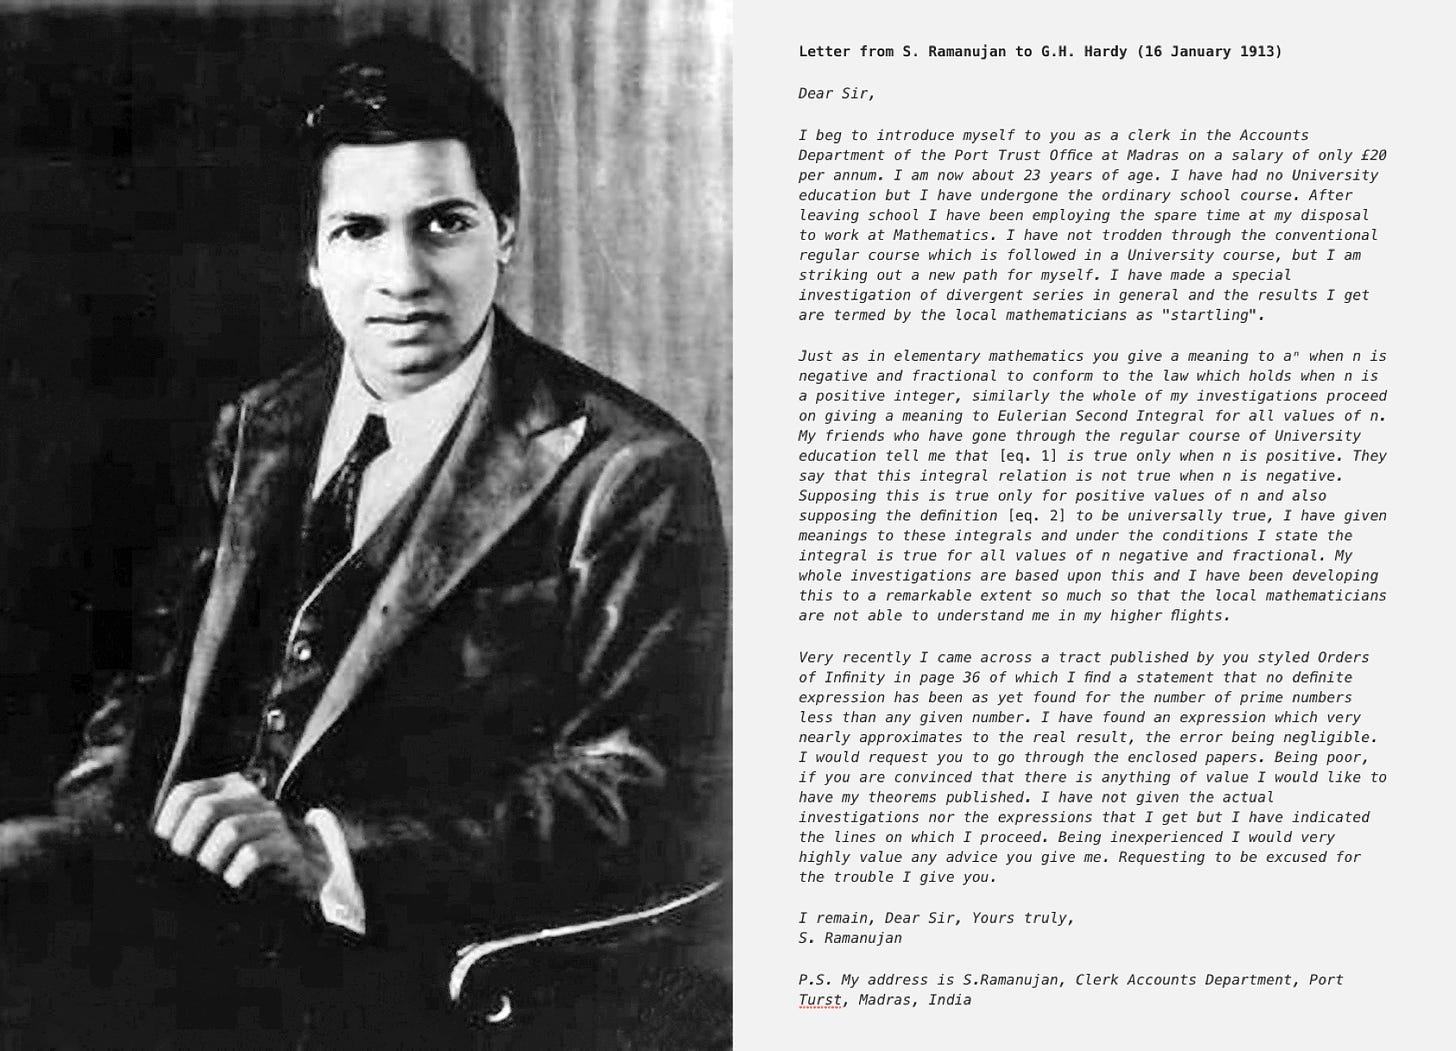 Ramanujan's First Letter to G.H. Hardy